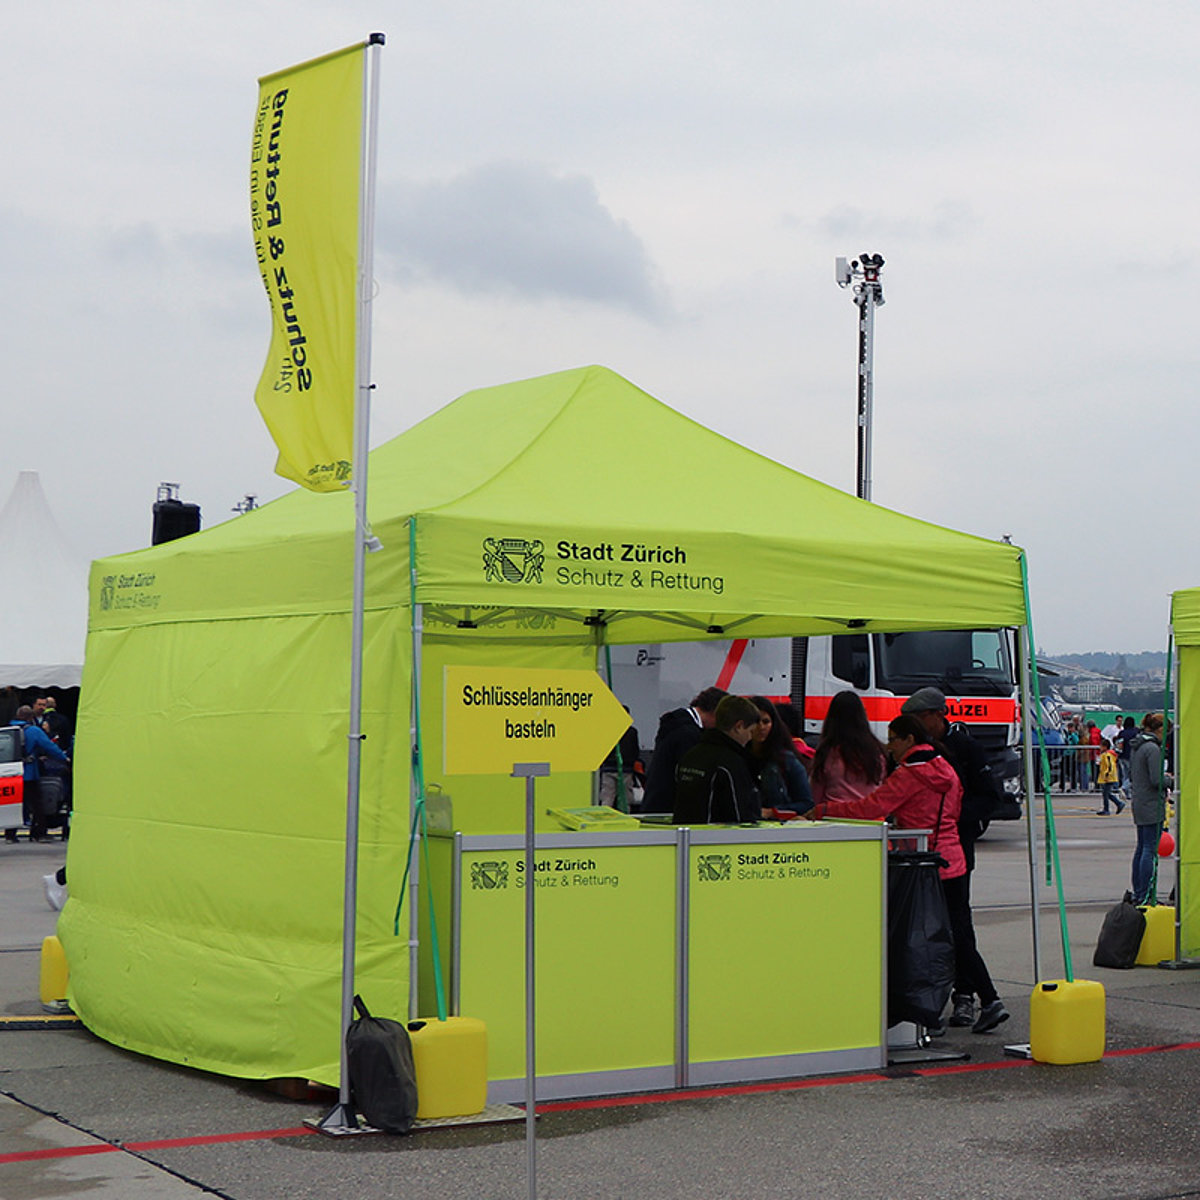 Two City of Zurich tents being used as information stands at an event.